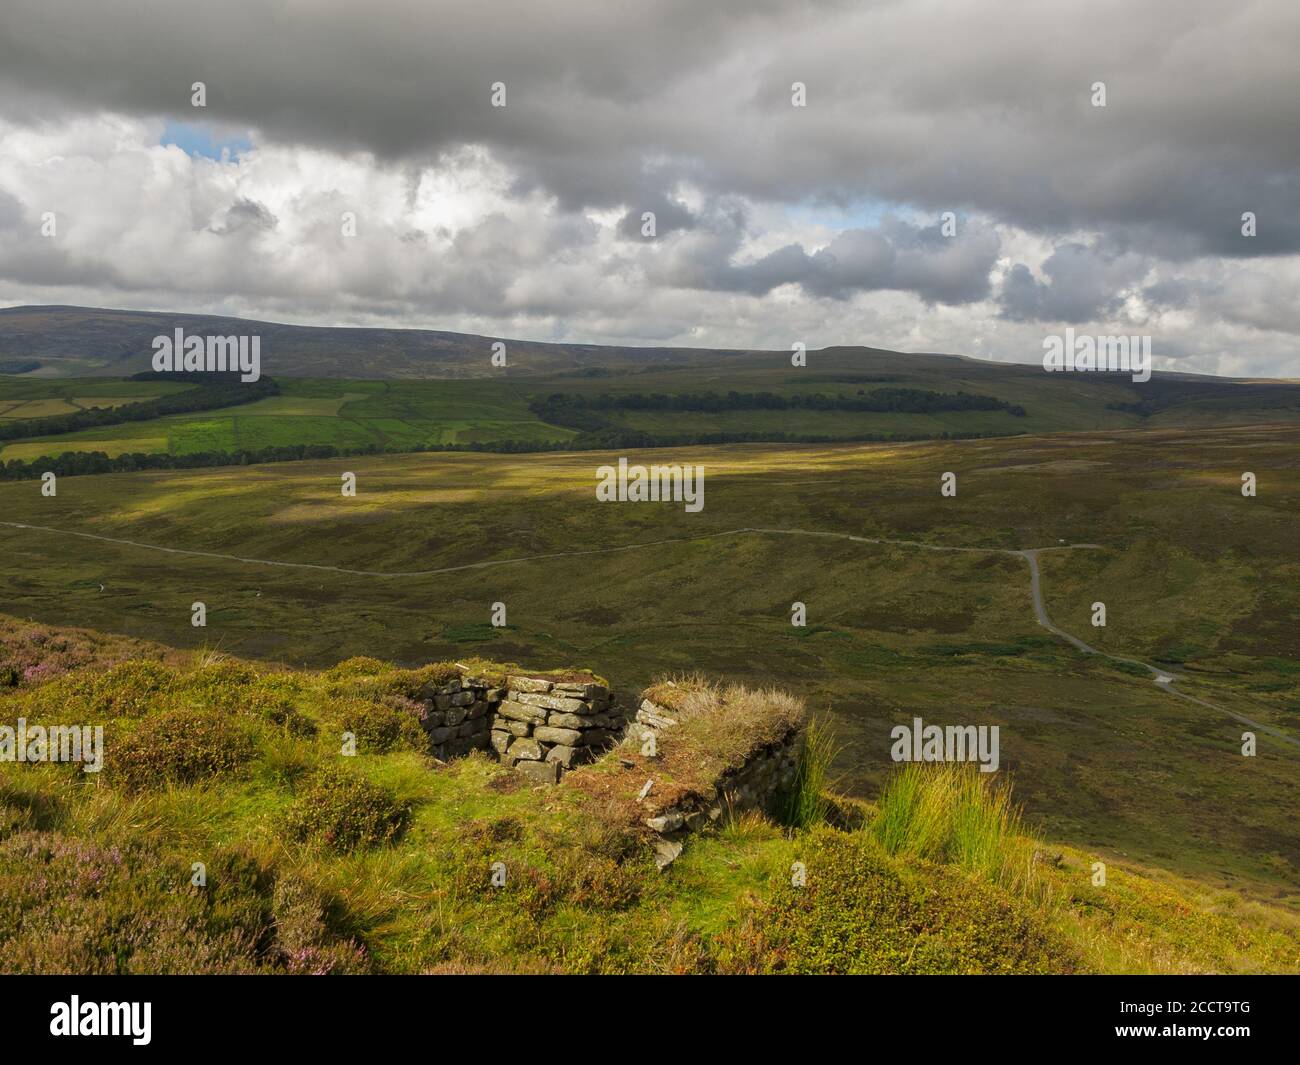 Shooting Butts on the slopes of Haythgornthwaite Fell, Marshaw in the Forest of Bowland Stock Photo